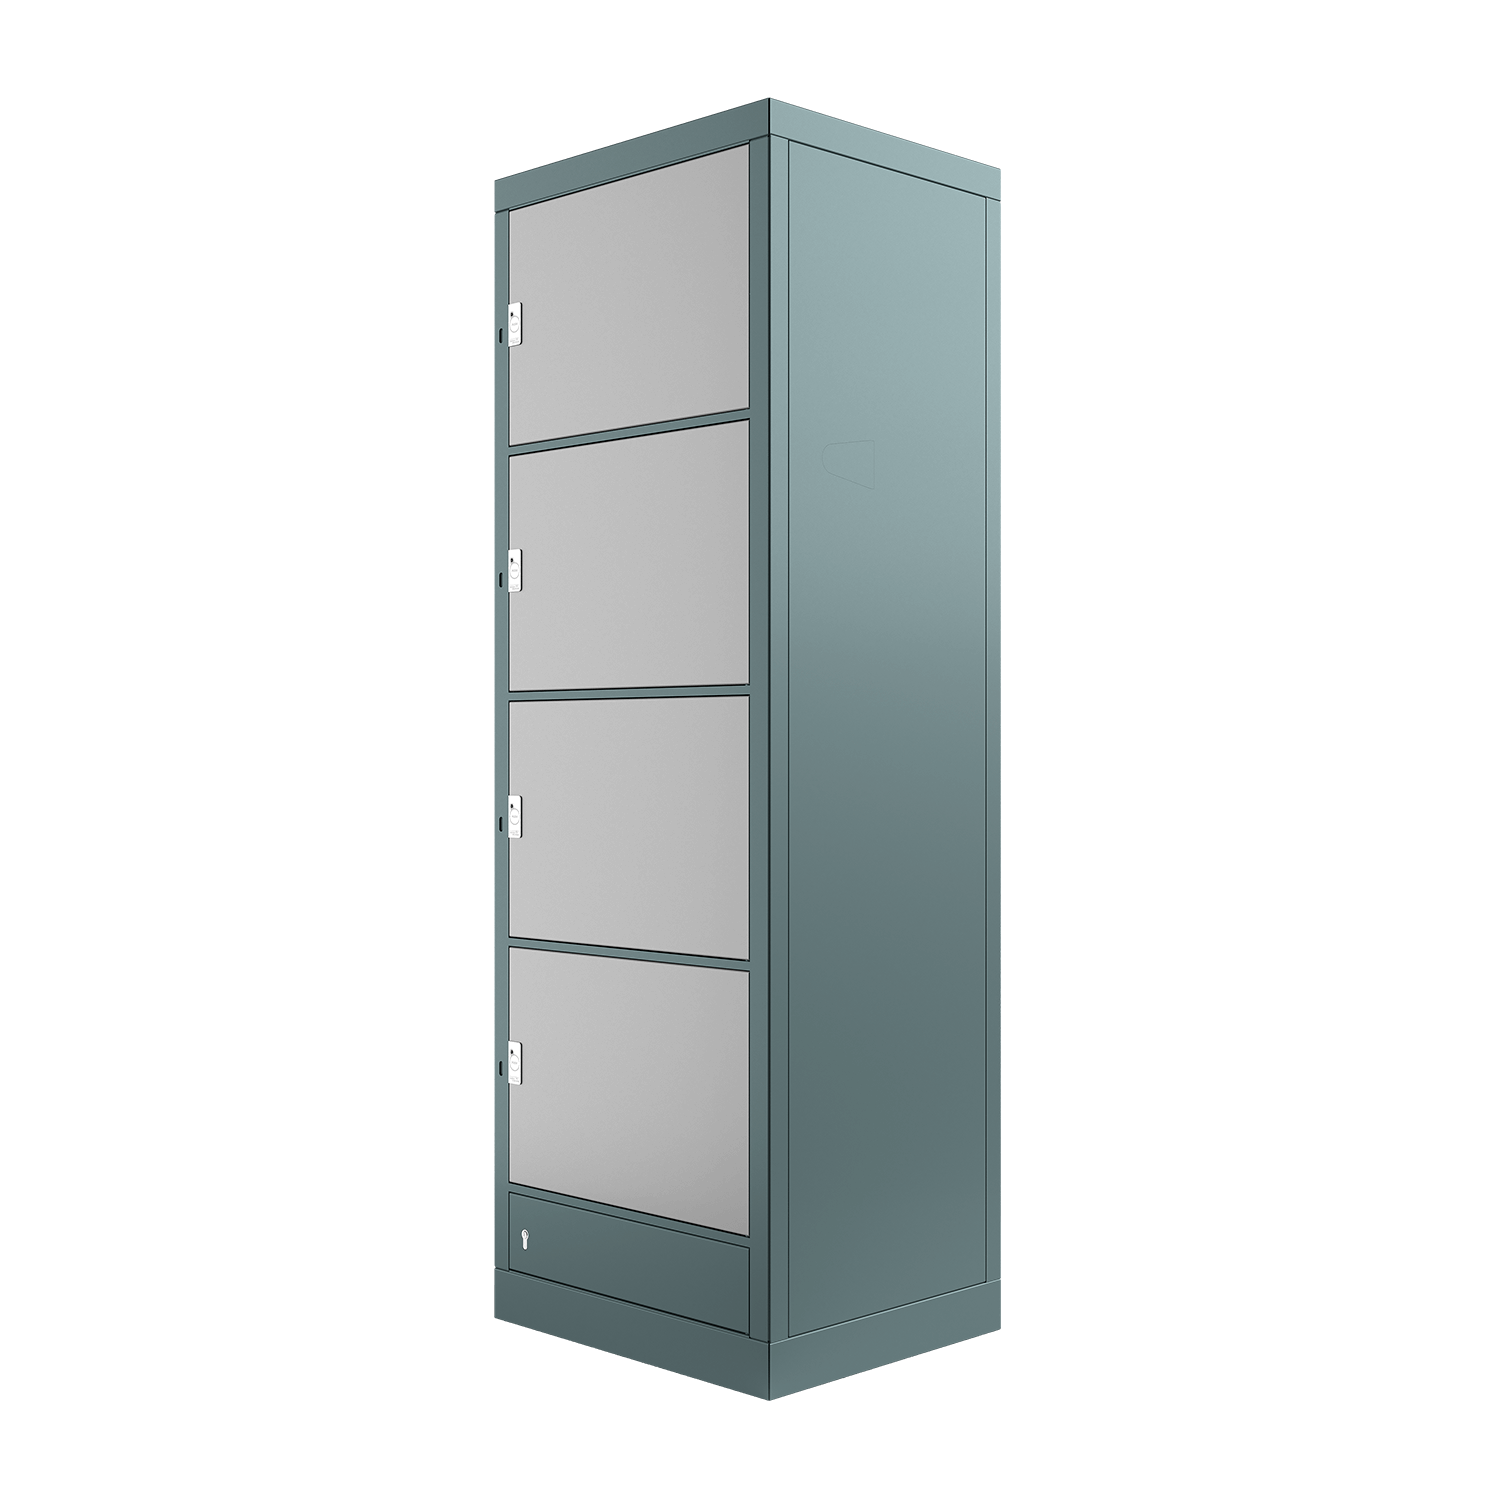 Locker system, L size, with 4 compartments for safekeeping